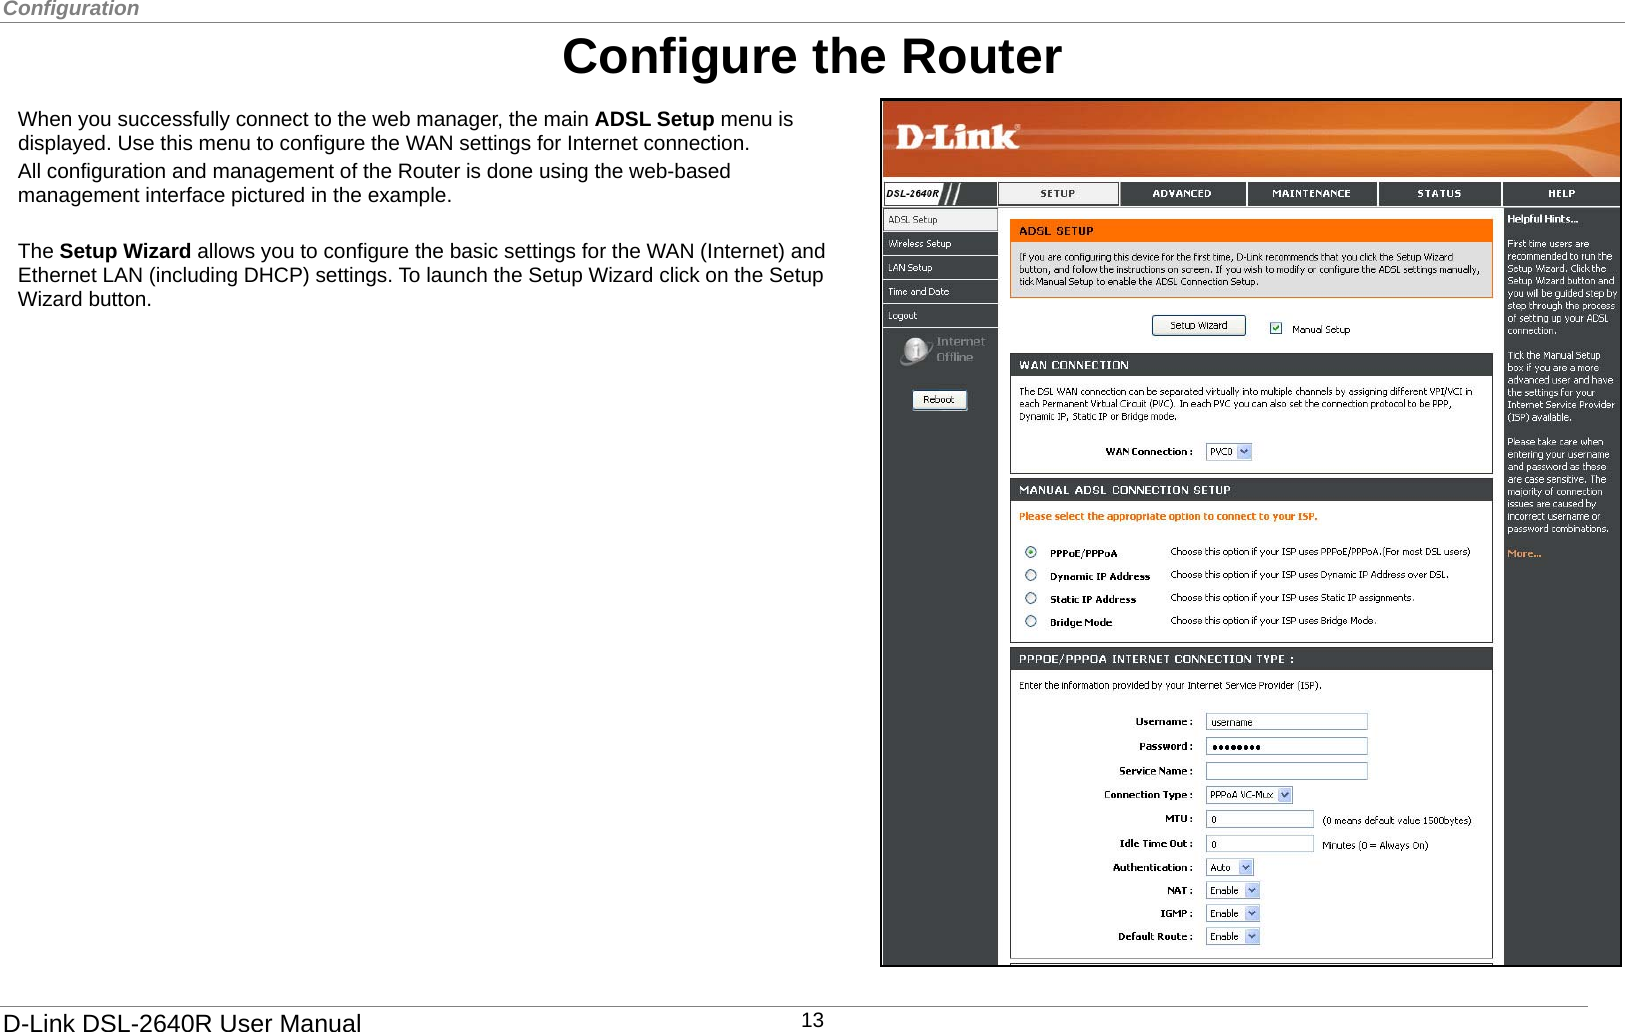 Configuration  Configure the Router D-Link DSL-2640R User Manual 13   The Setup Wizard allows you to configure the basic settings for the WAN (Internet) and Ethernet LAN (including DHCP) settings. To launch the Setup Wizard click on the Setup Wizard button. When you successfully connect to the web manager, the main ADSL Setup menu is displayed. Use this menu to configure the WAN settings for Internet connection.   All configuration and management of the Router is done using the web-based management interface pictured in the example.          